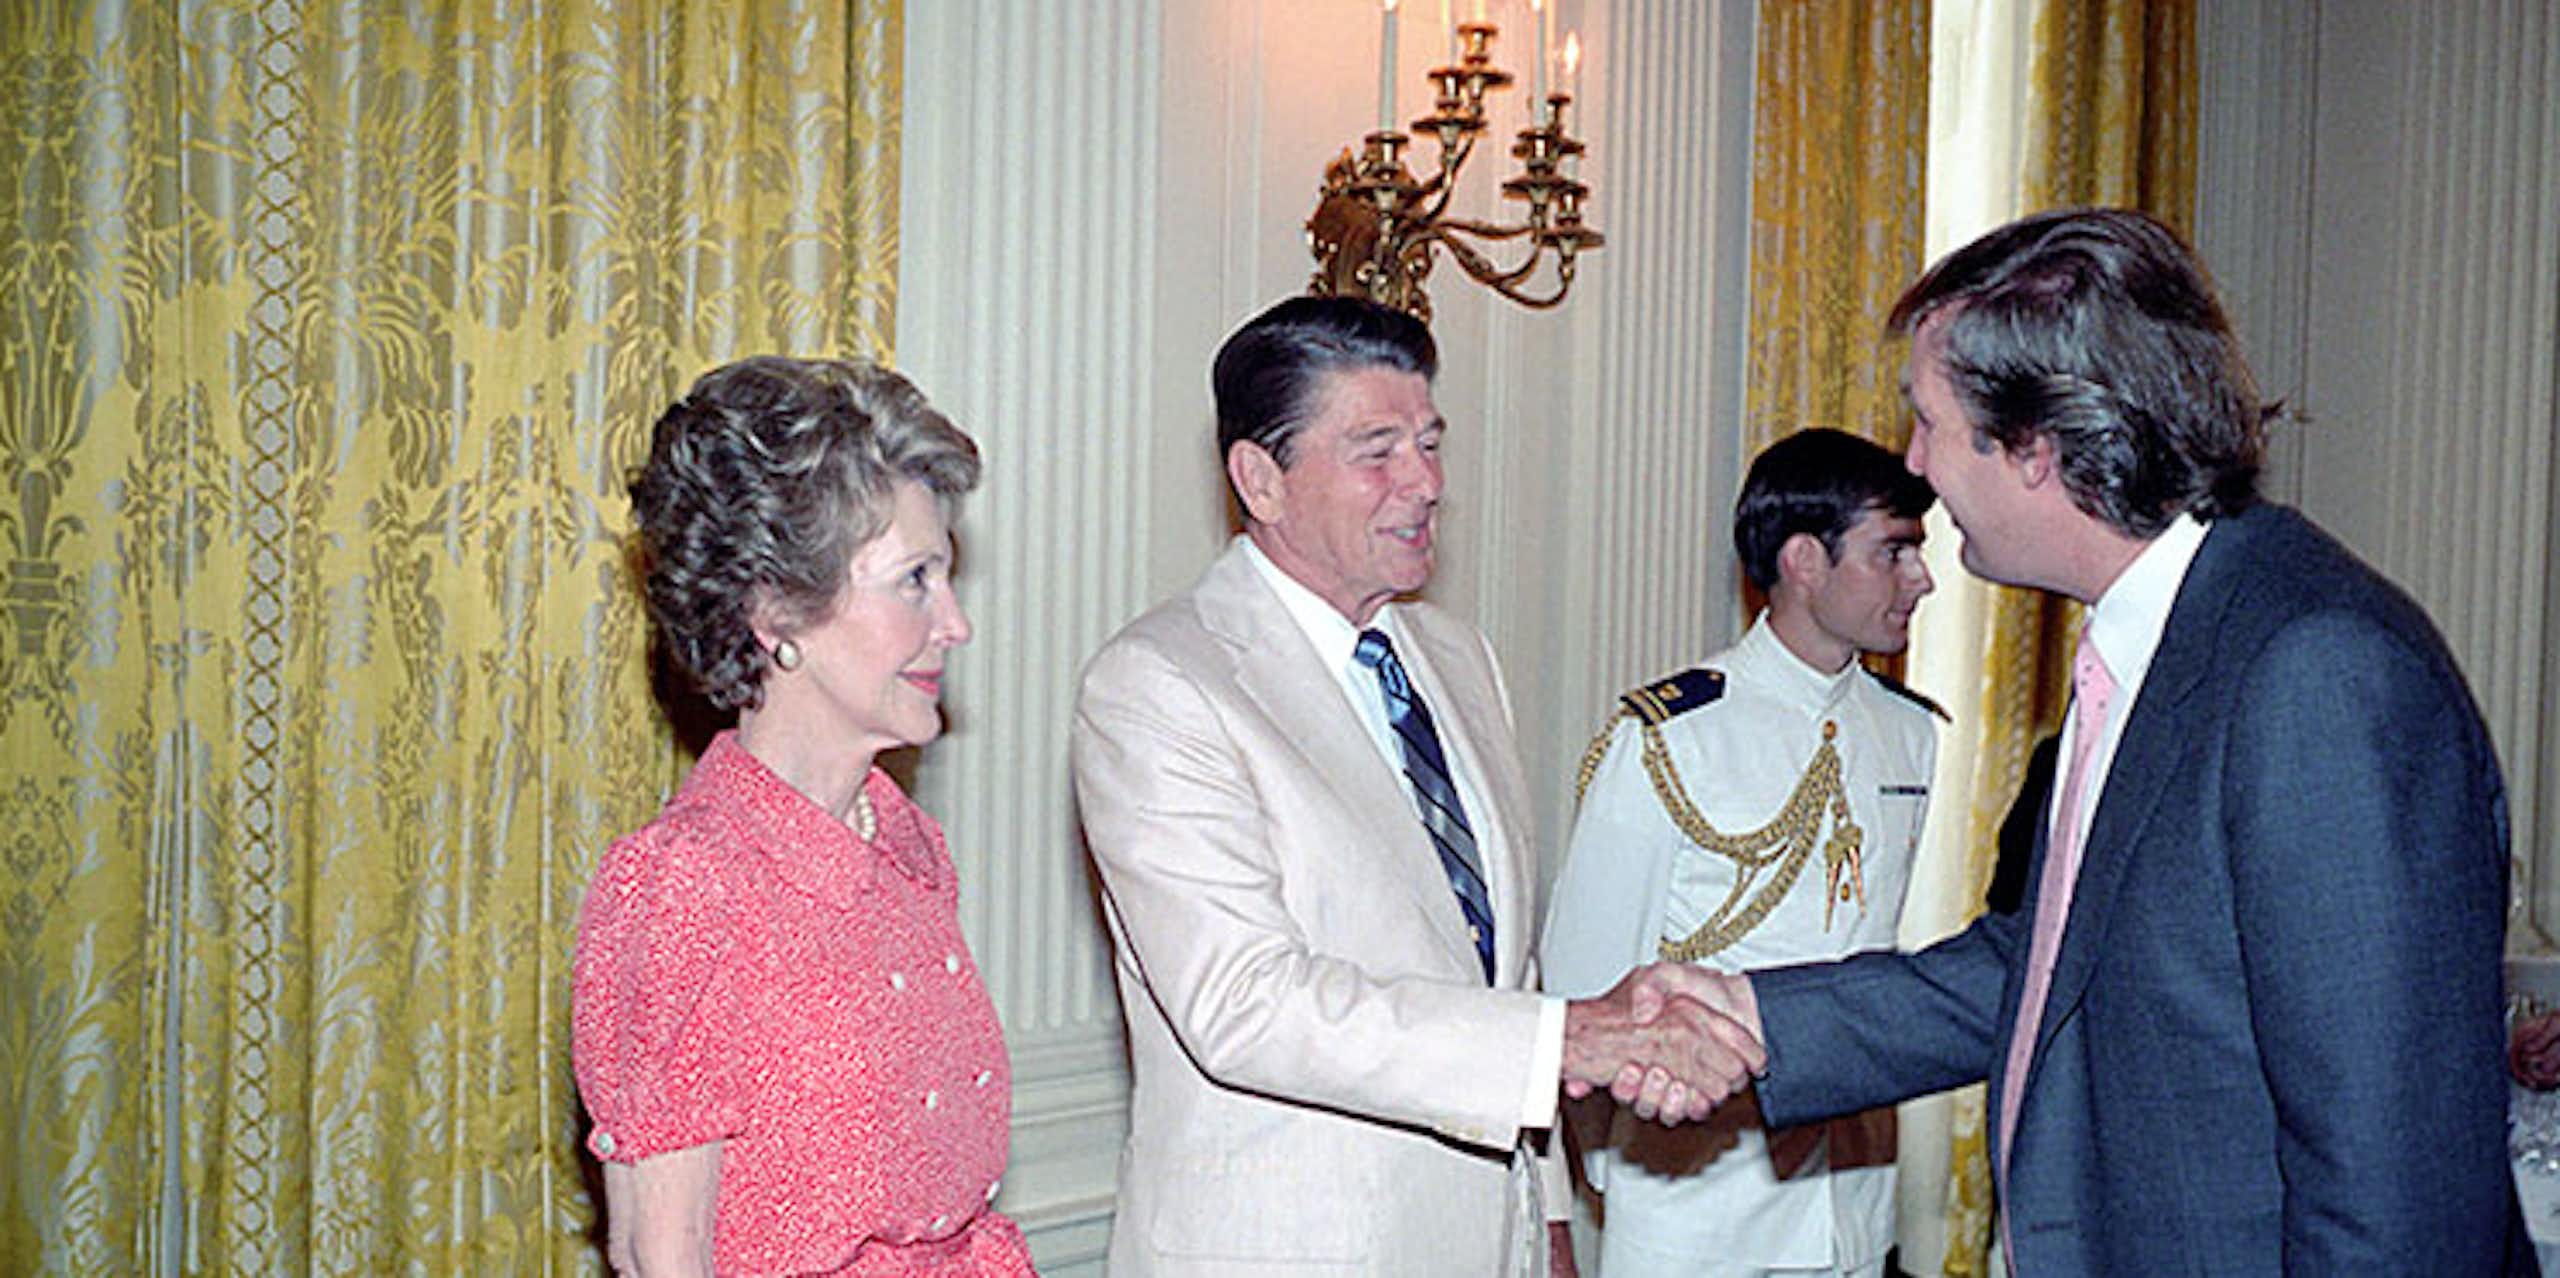 A man in a white suit shakes hands with a younger man in a navy suit while a woman in a pink dress looks on.